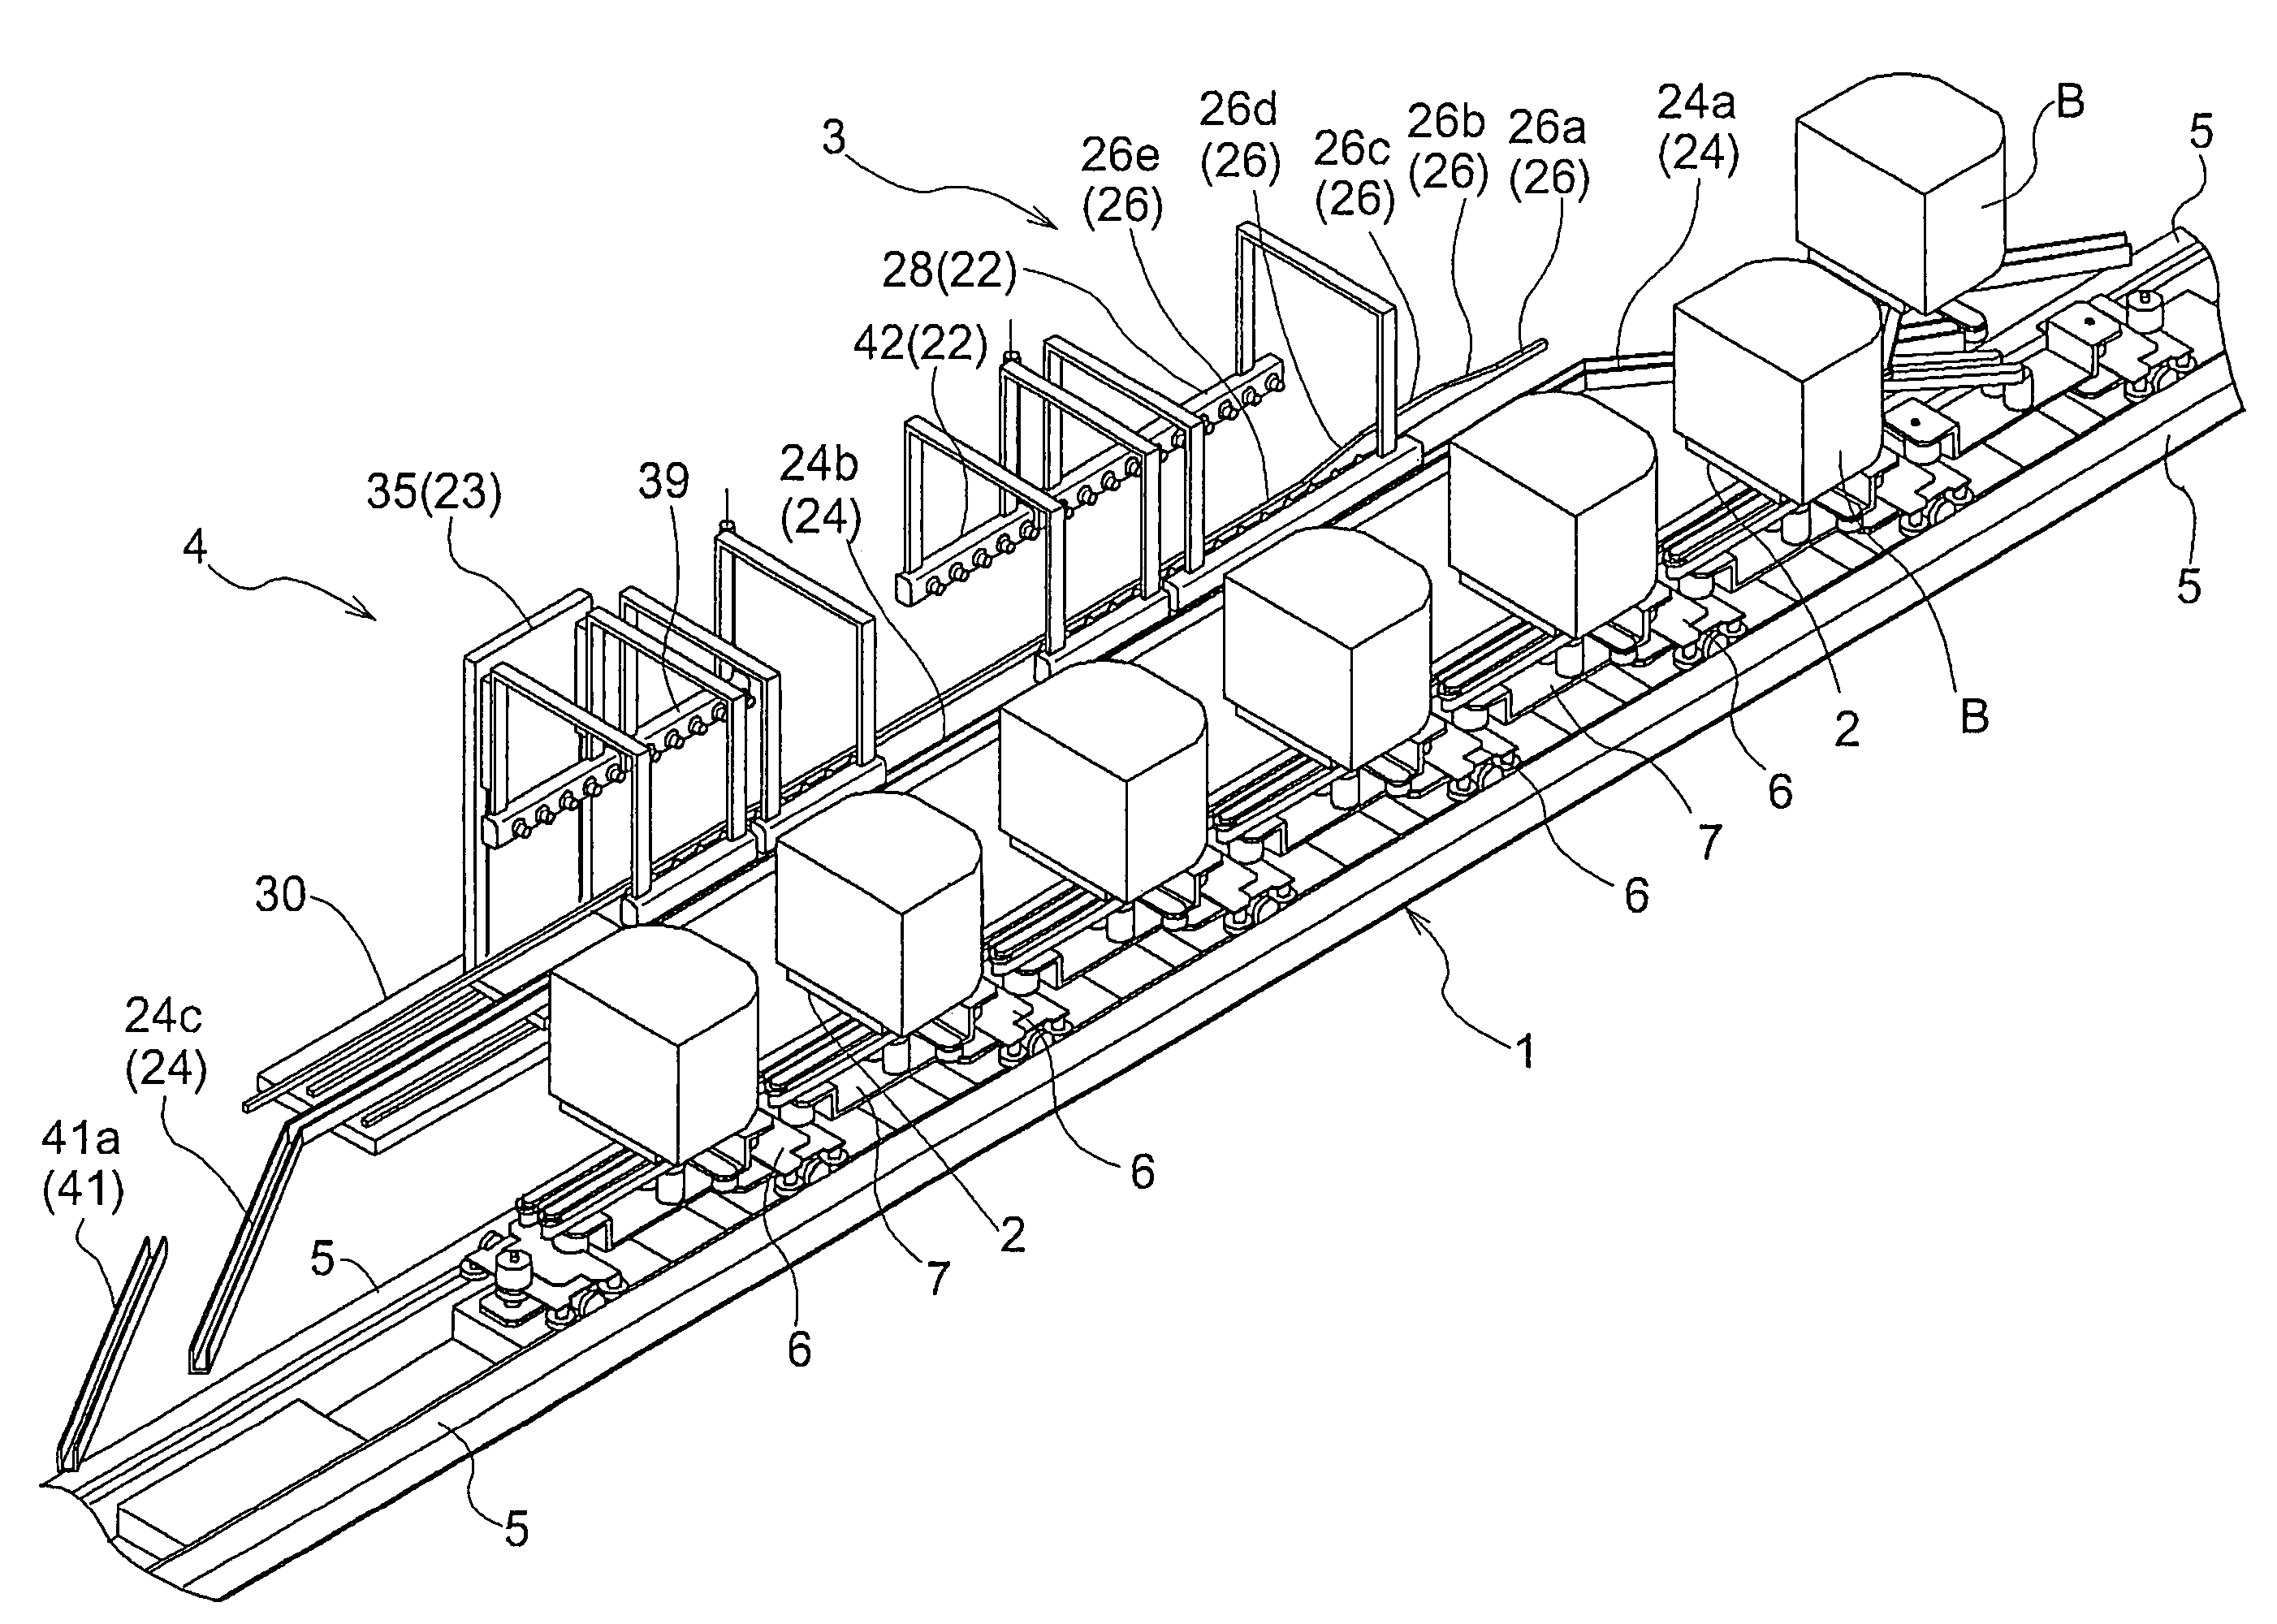 Article transport device